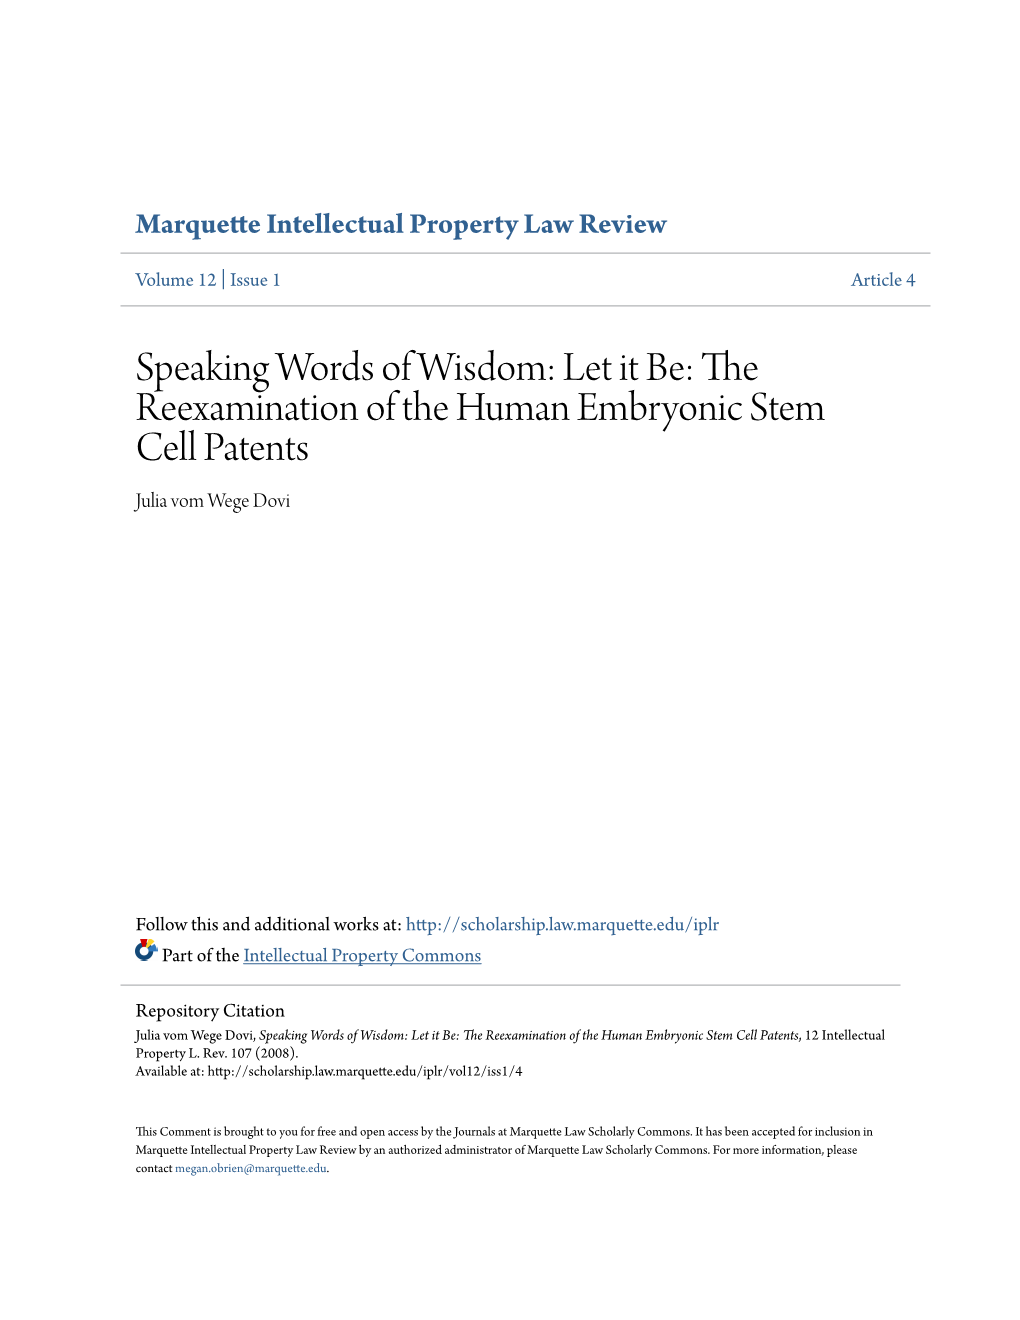 Speaking Words of Wisdom: Let It Be: the Reexamination of the Human Embryonic Stem Cell Patents Julia Vom Wege Dovi